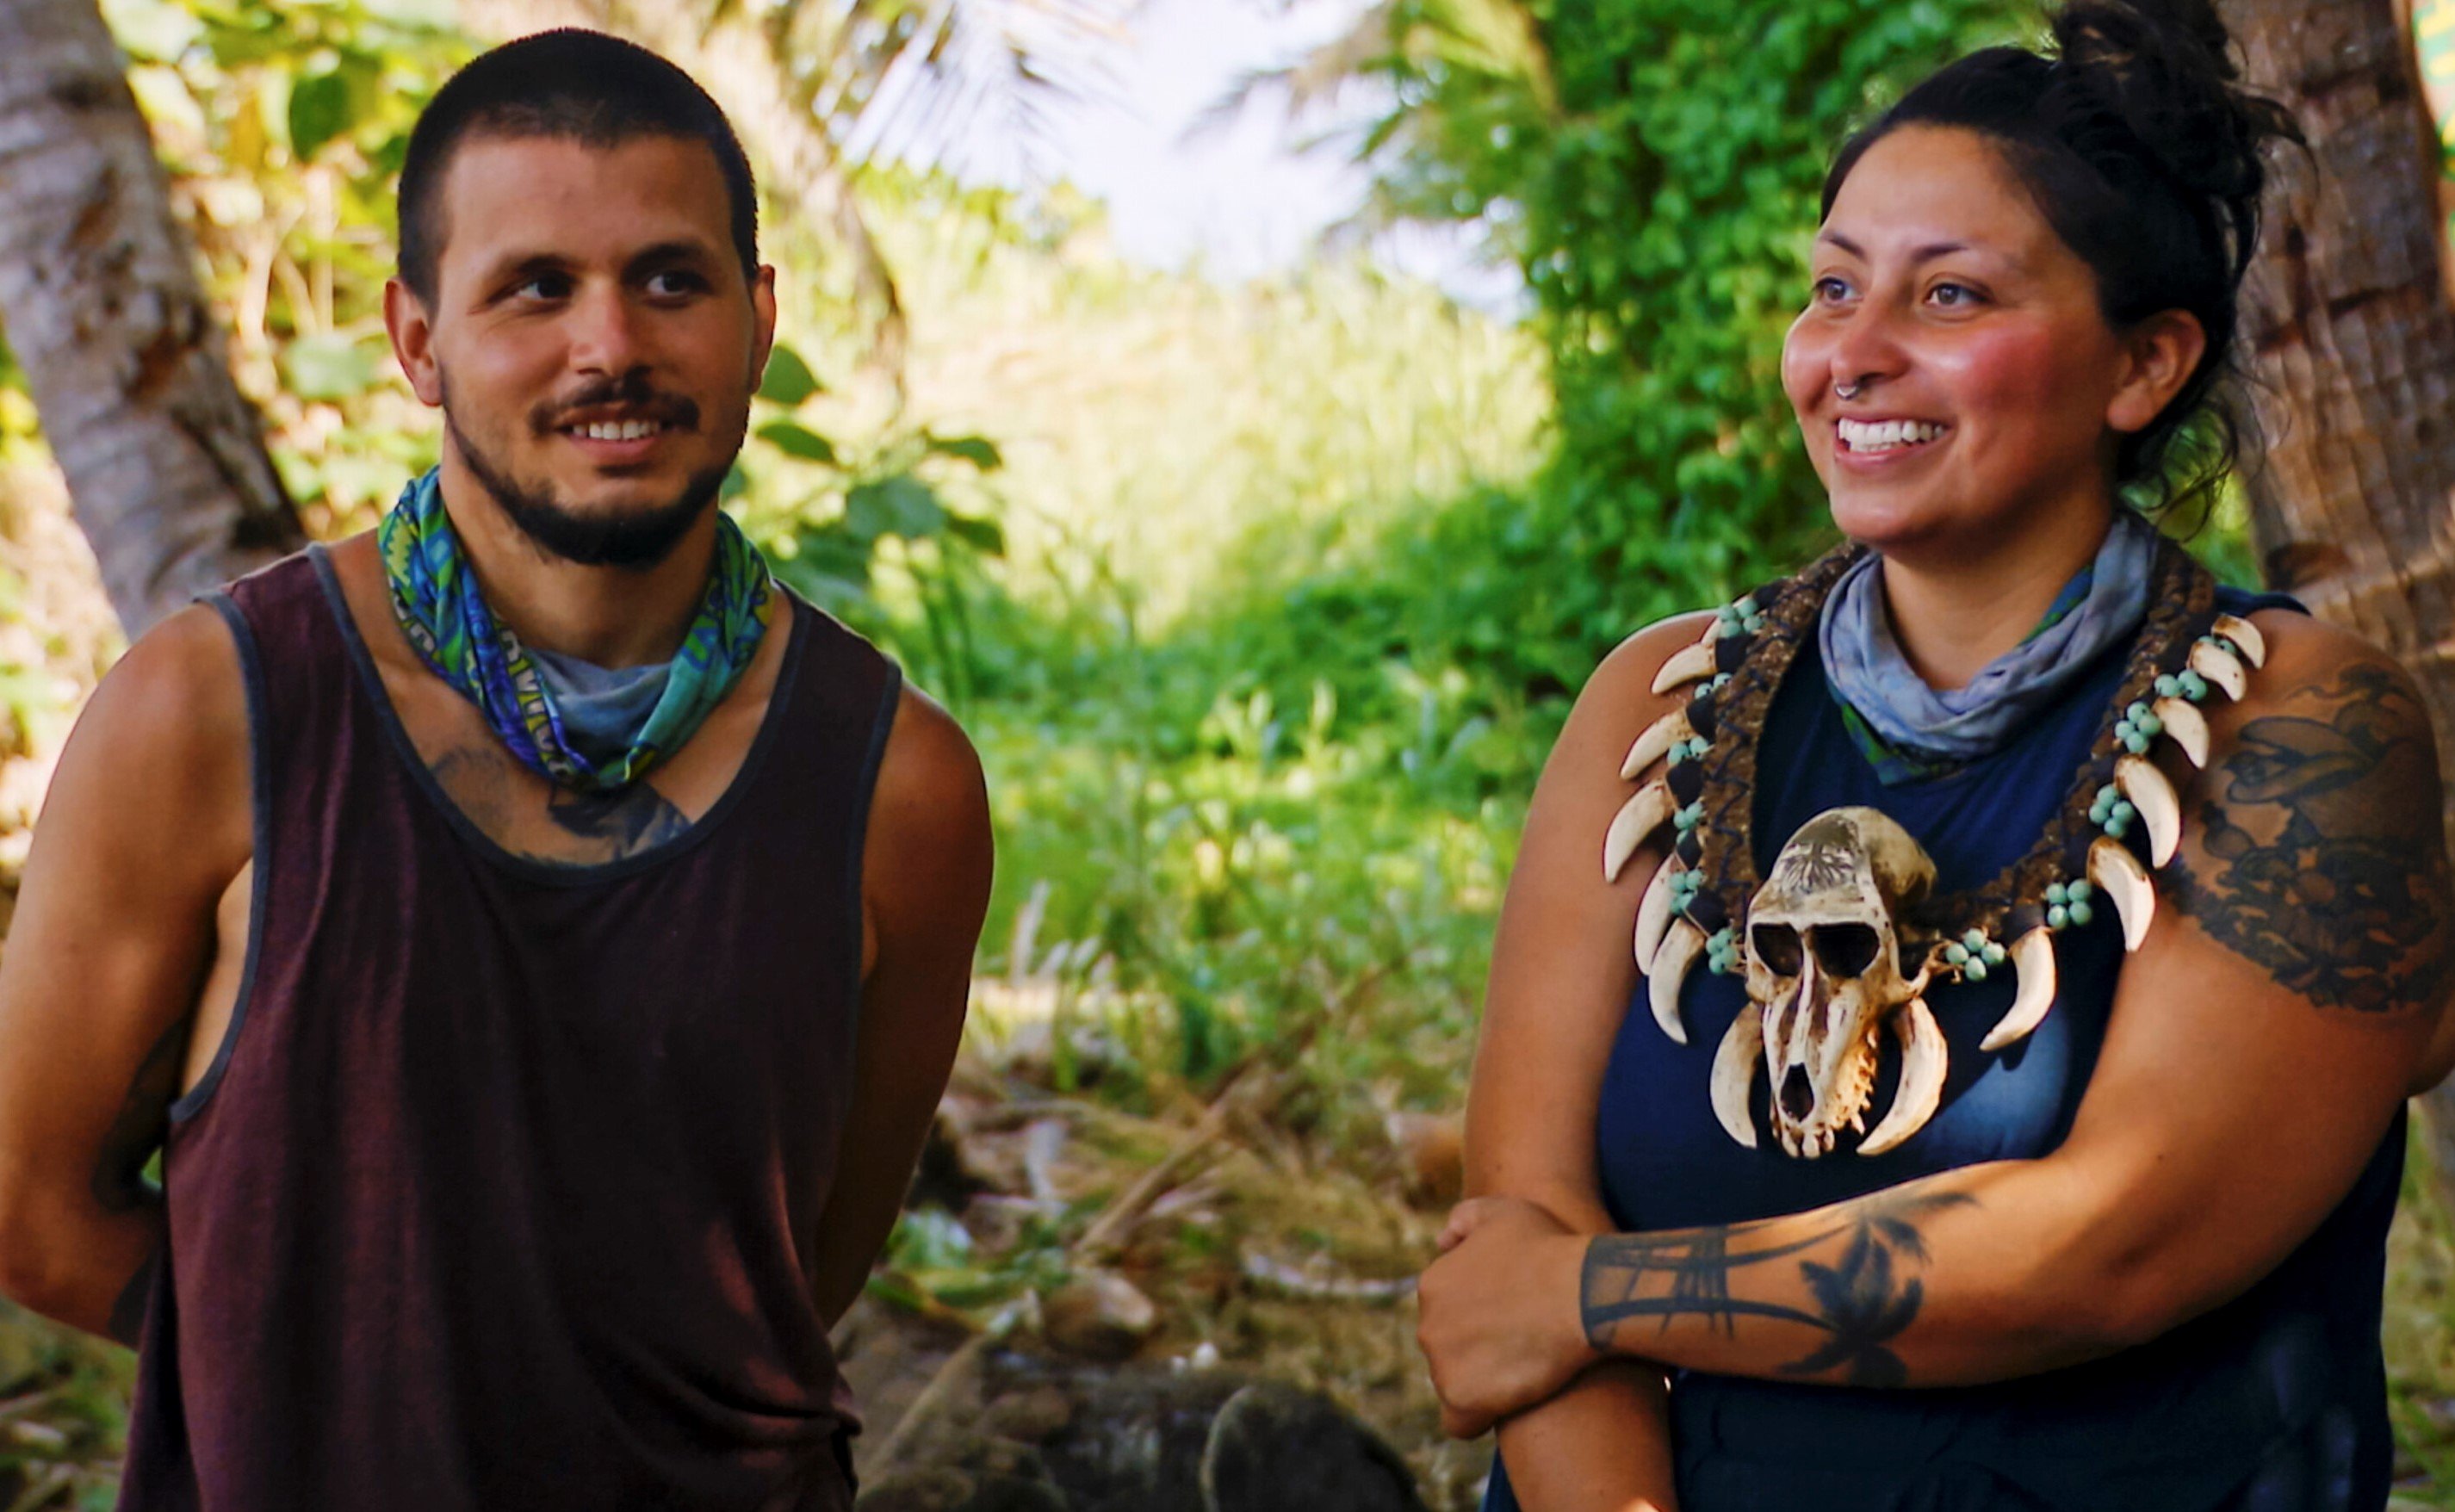 Jesse Lopez and Karla Cruz Godoy. who, according to 'Survivor' spoilers, may be headed home in the next season 43 episode, converse at camp.